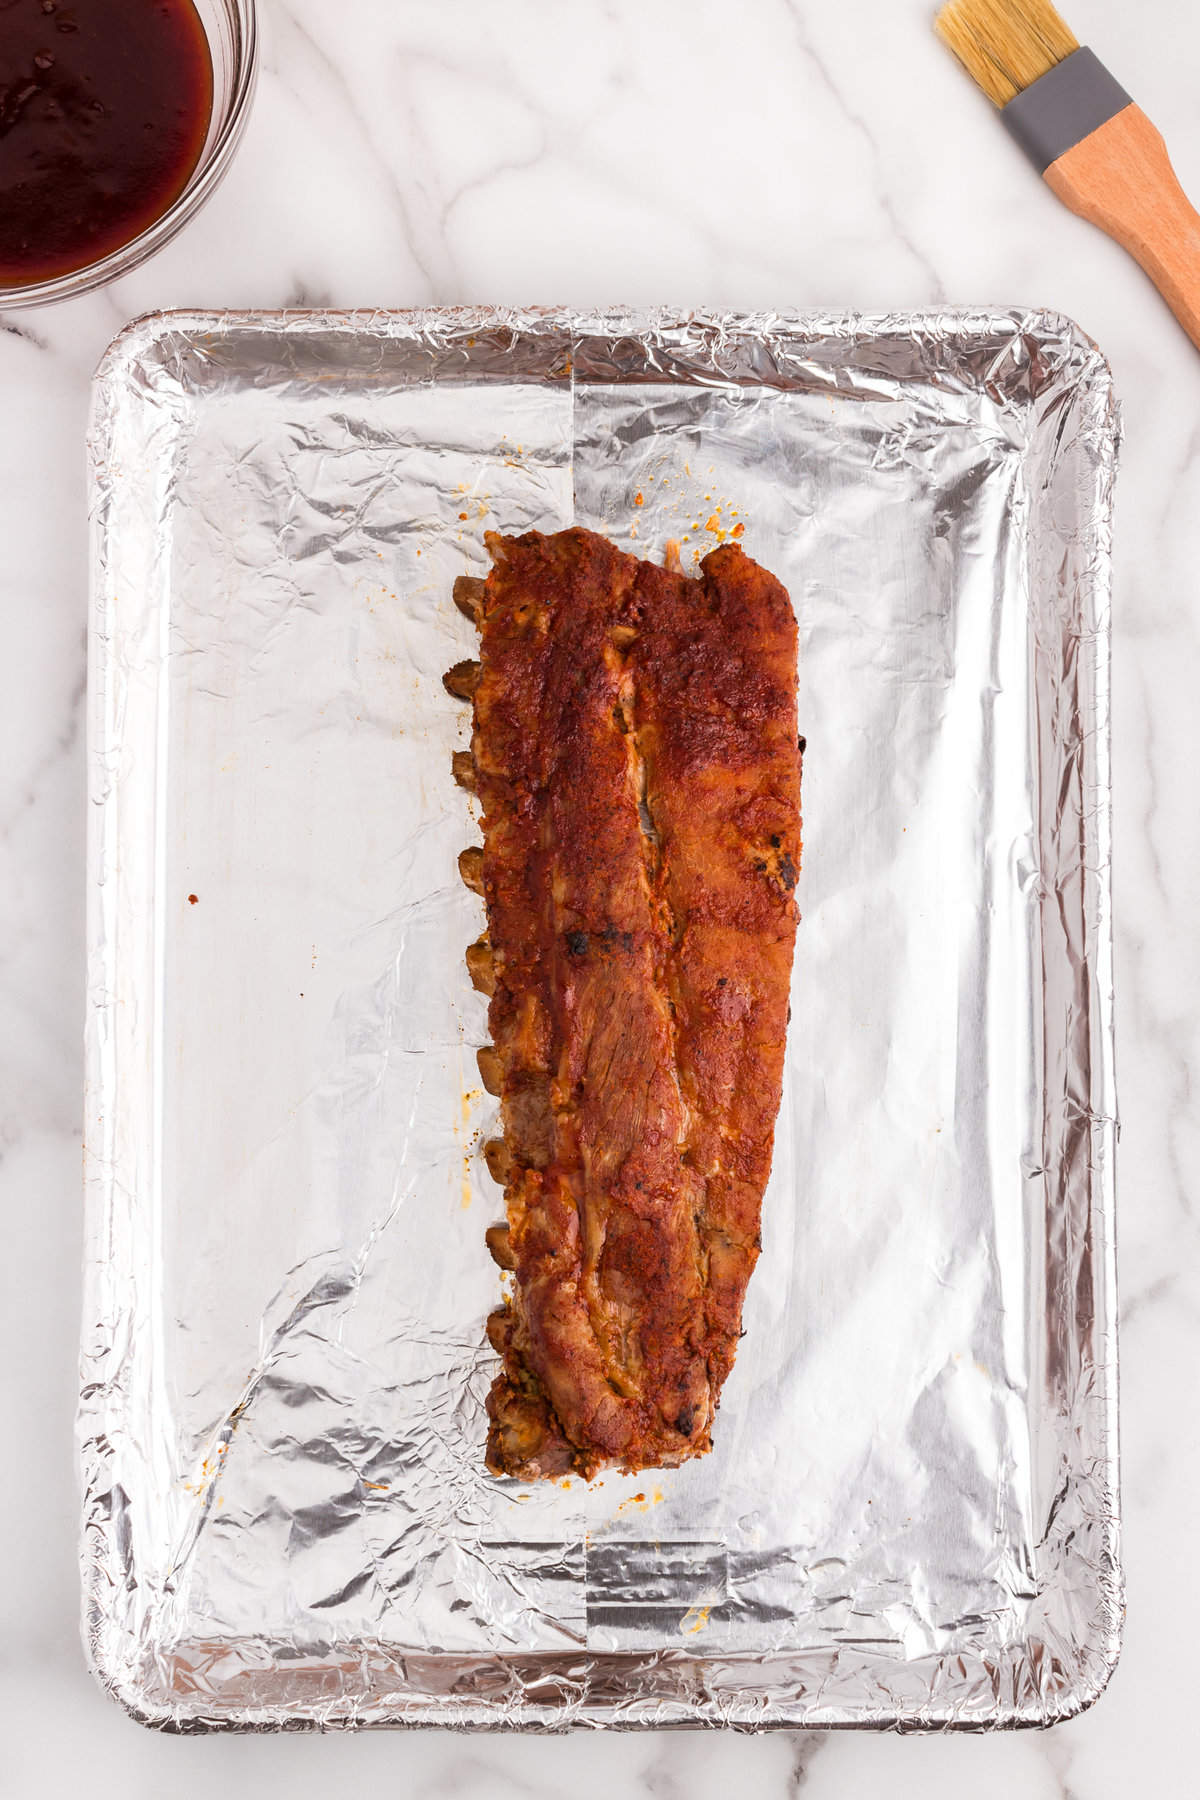 Transferring Oven Baked Ribs to tinfoil-lined baking sheet